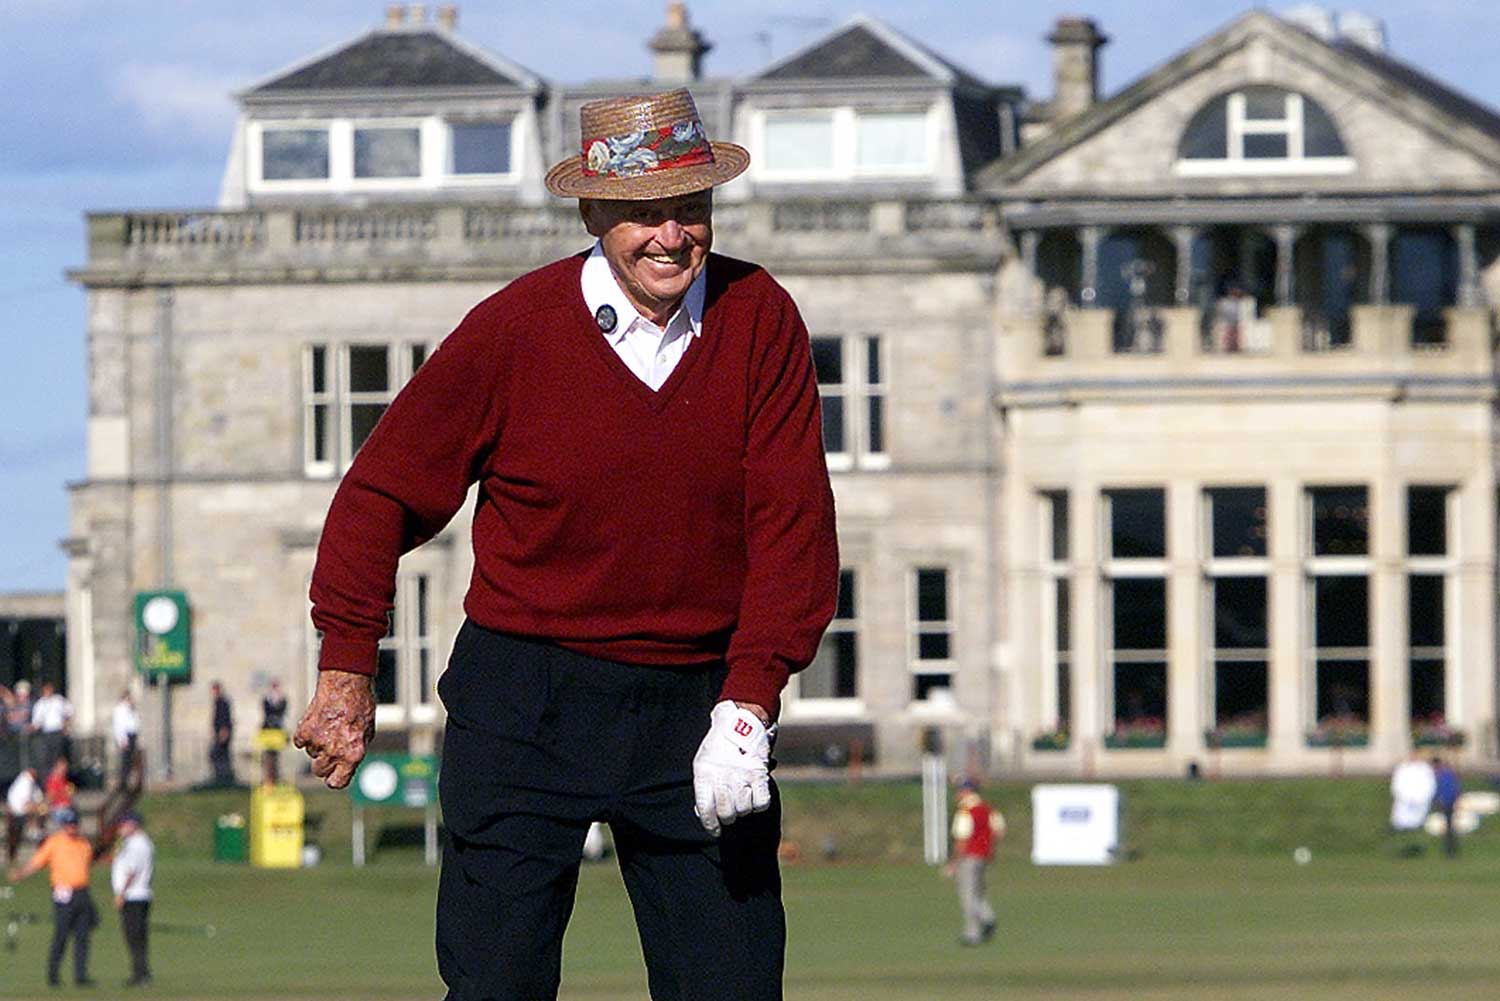 Sam Snead poses on the Swilcan Bridge at the 2000 Open (Photo: Getty Images)